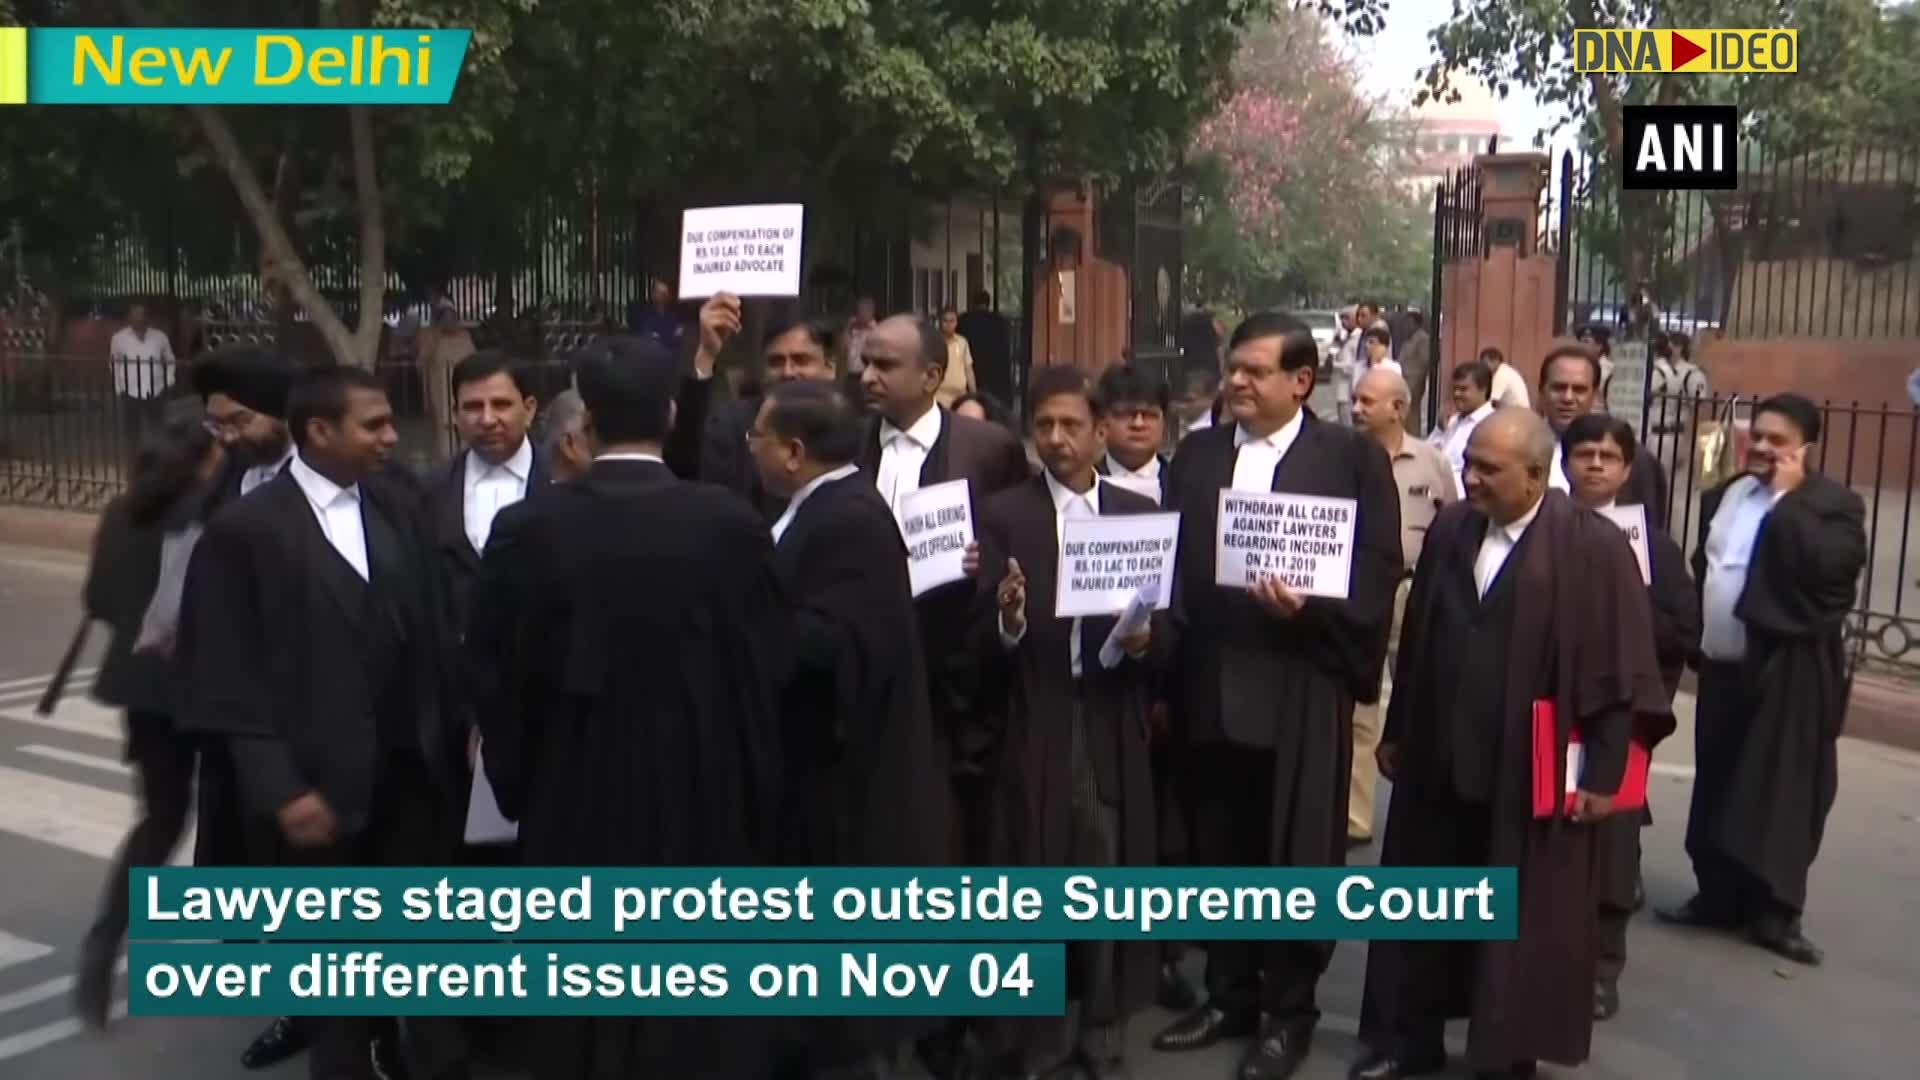 Lawyers stage protest outside Supreme Court over different issues1920 x 1080